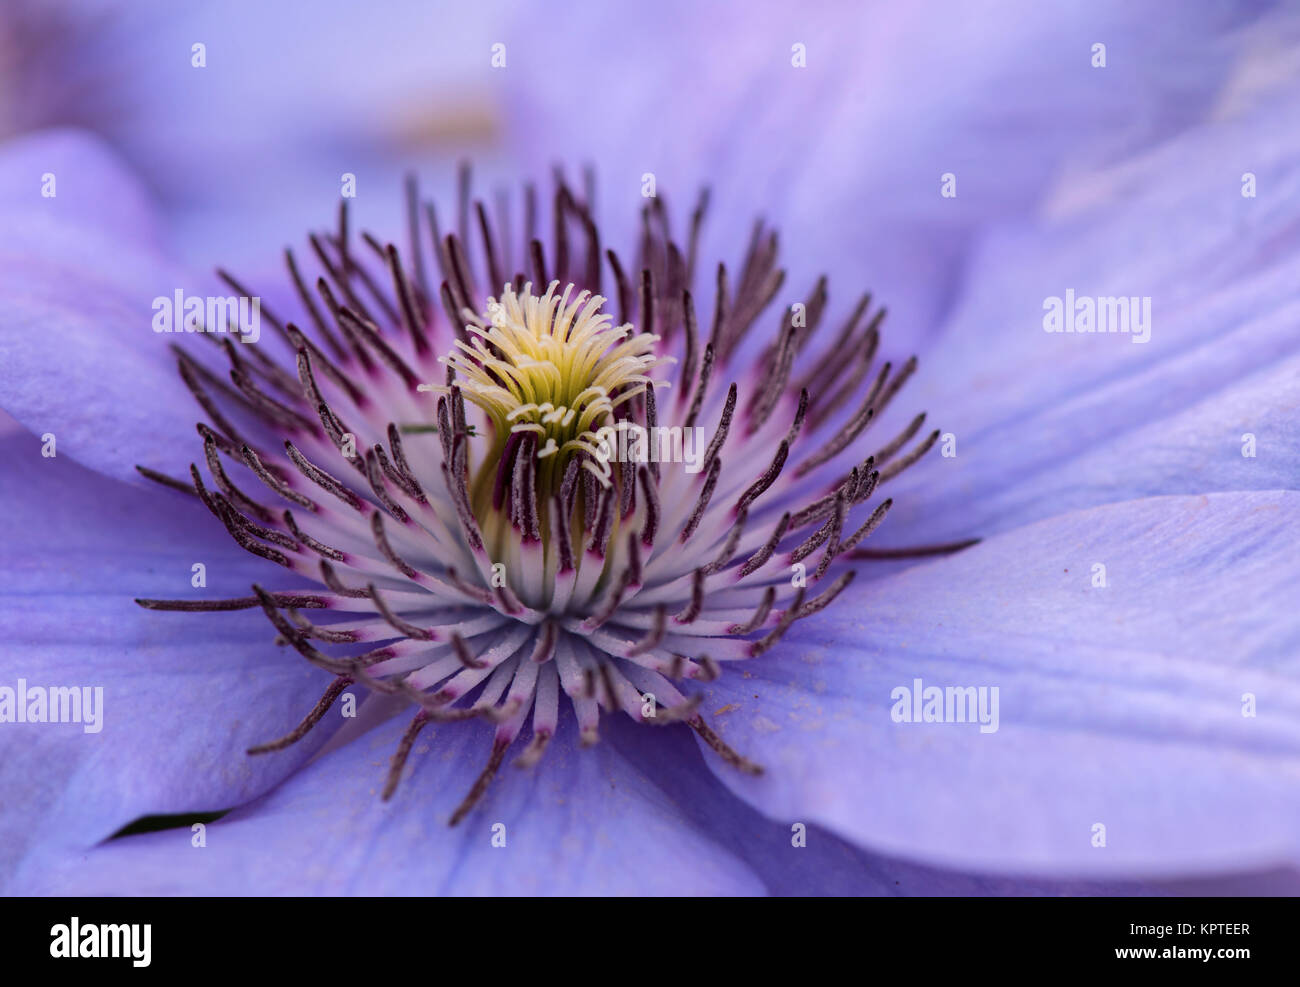 Close up photo of the clematis flower Stock Photo